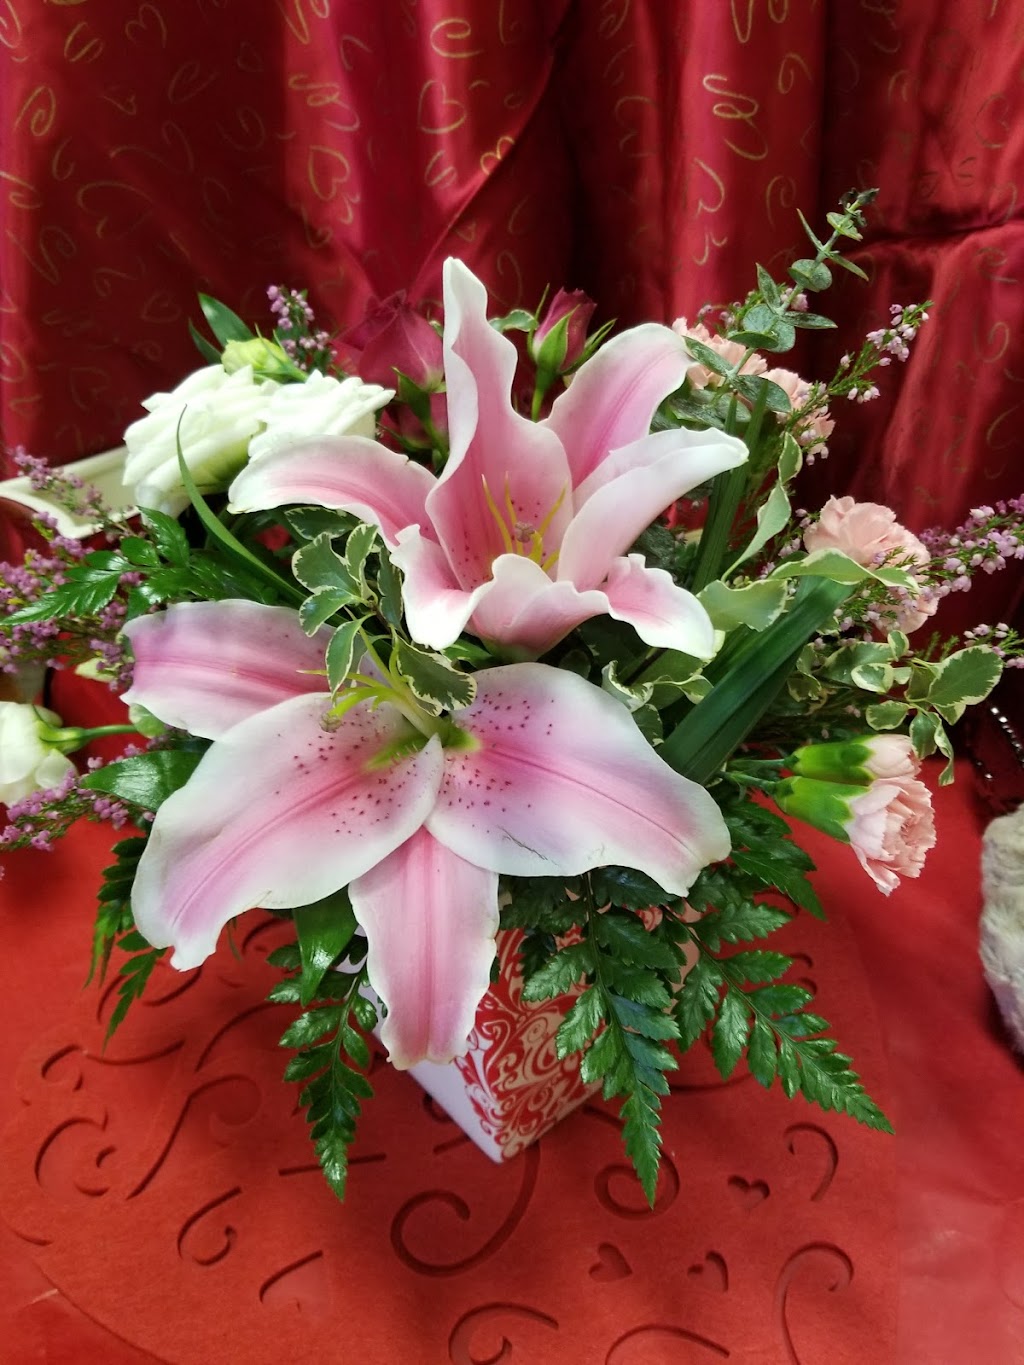 Botanica Flowers and Gifts | 2130-L, New Garden Rd, Greensboro, NC 27410, USA | Phone: (336) 288-1908